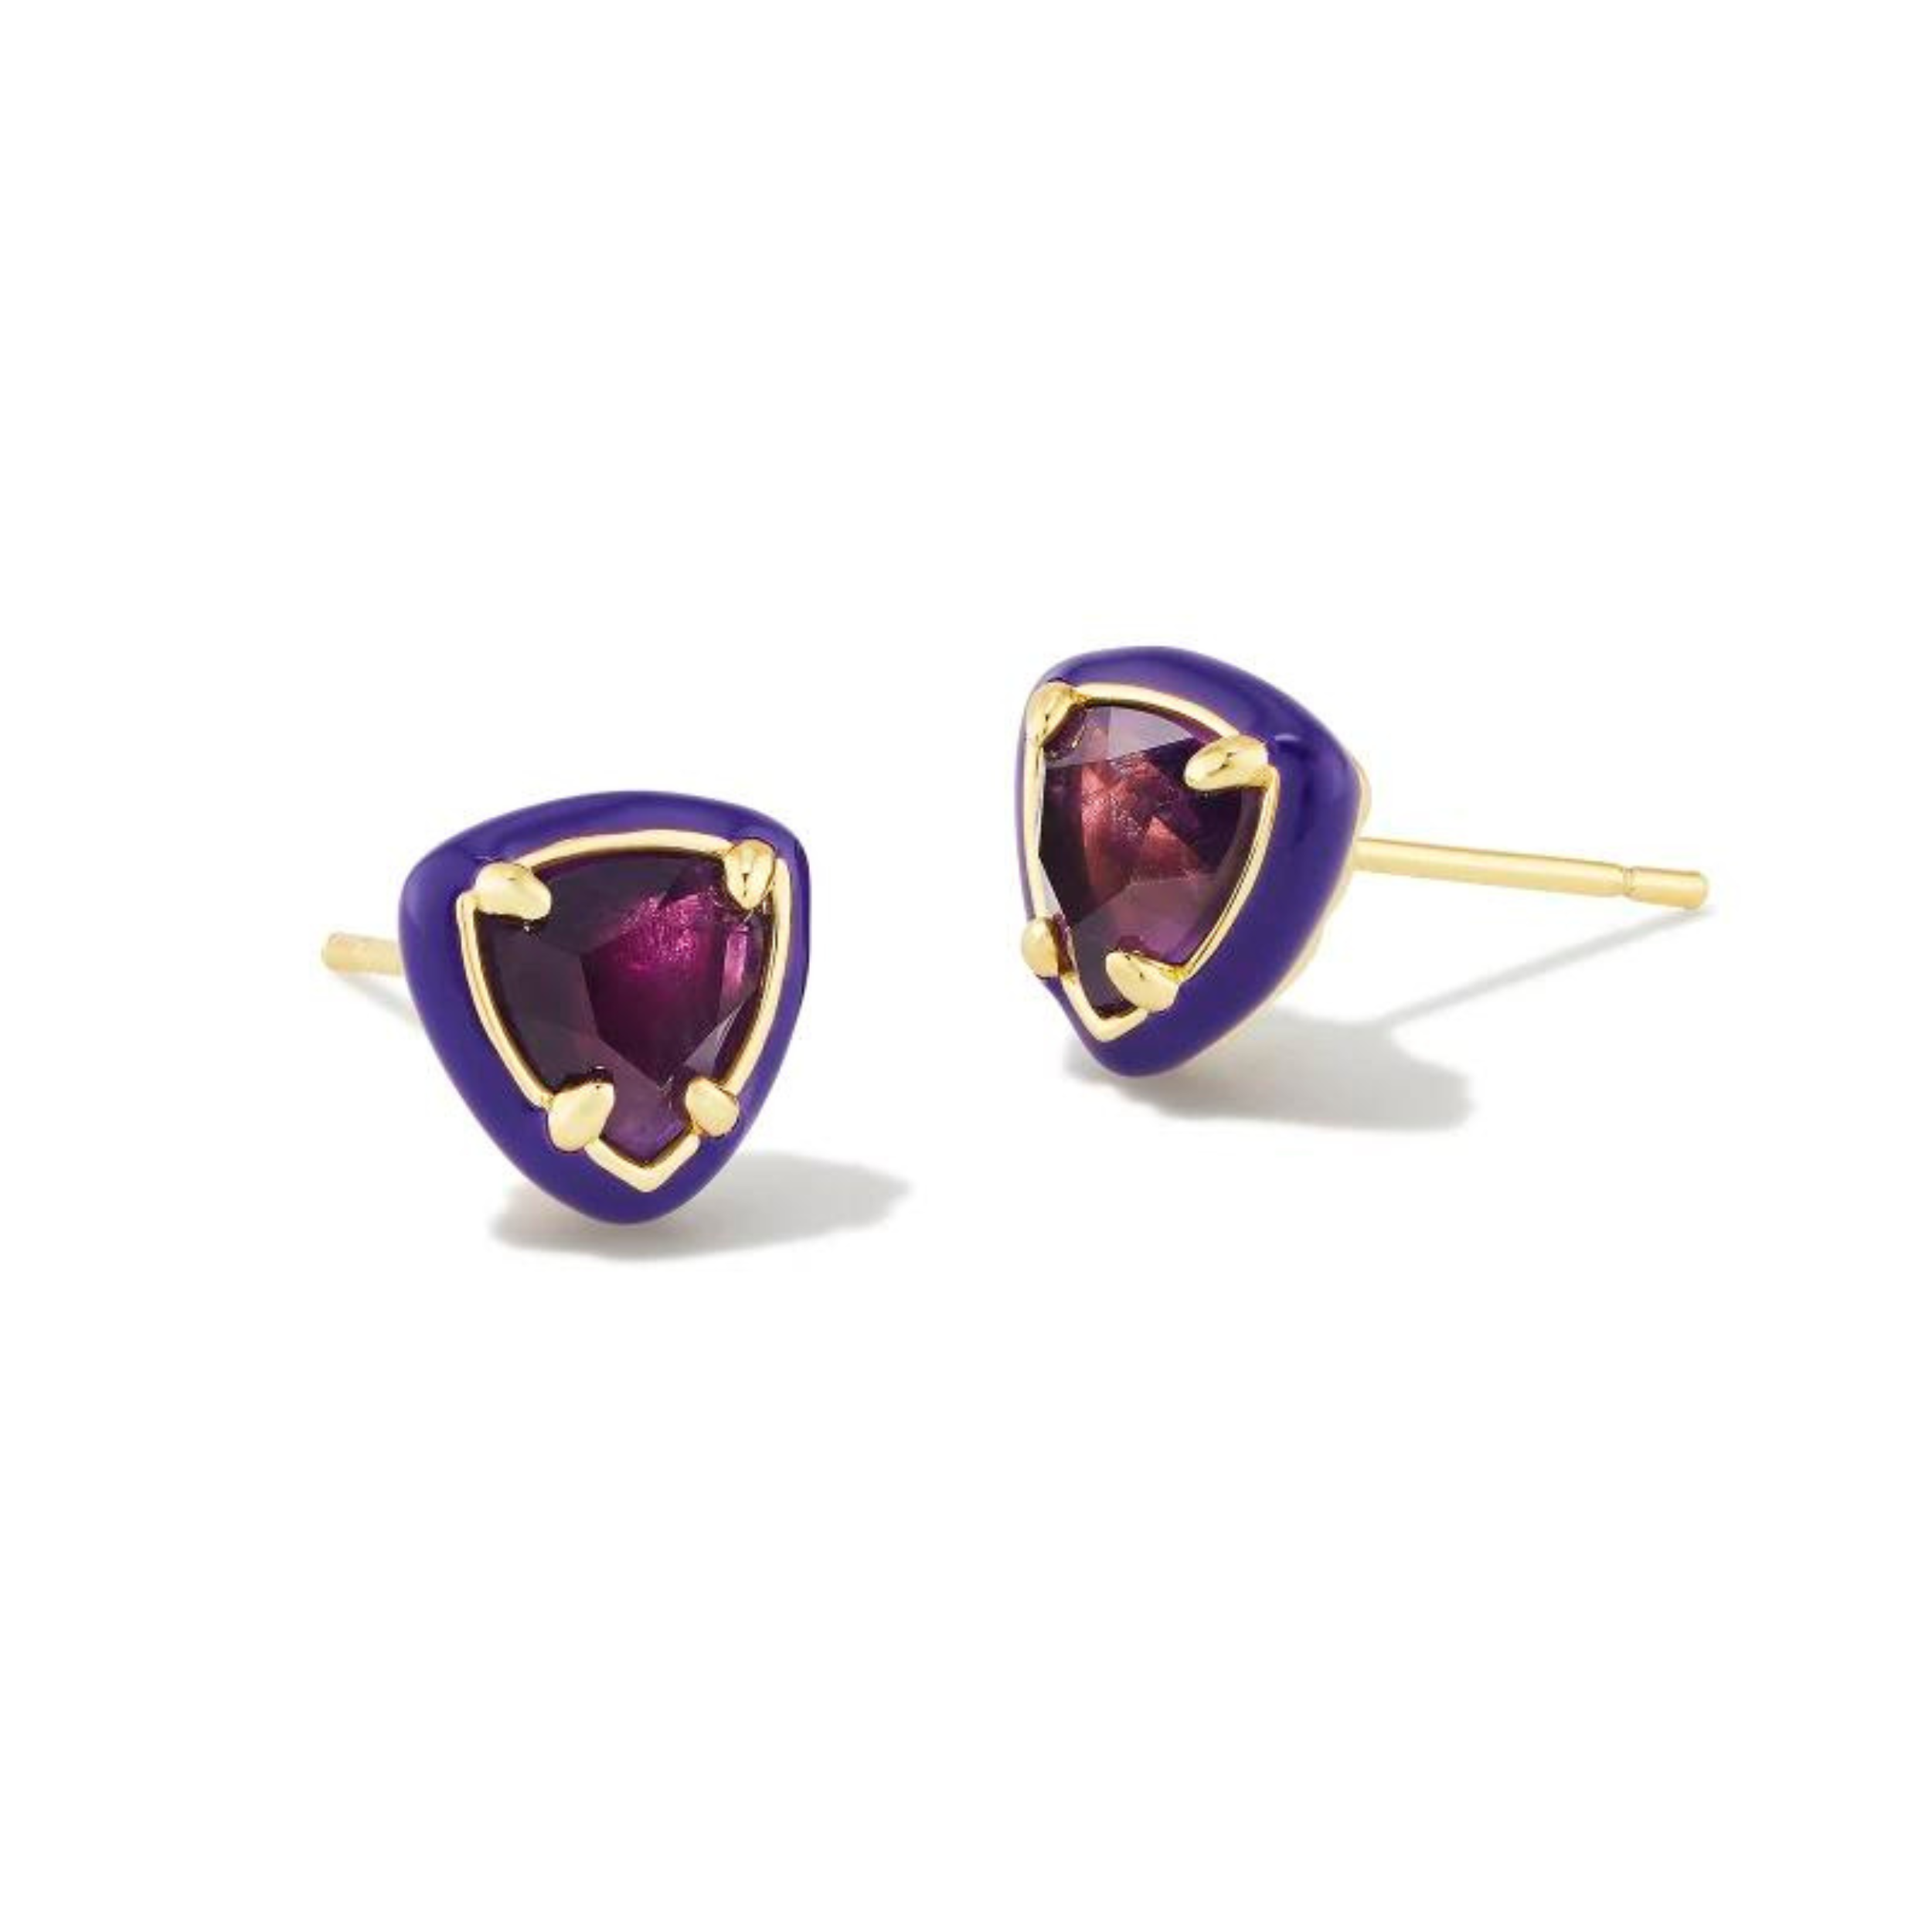 Purple framed, triangle shaped stud earrings with a center purple stone and a gold ear post. These earrings are pictured on a white background. 